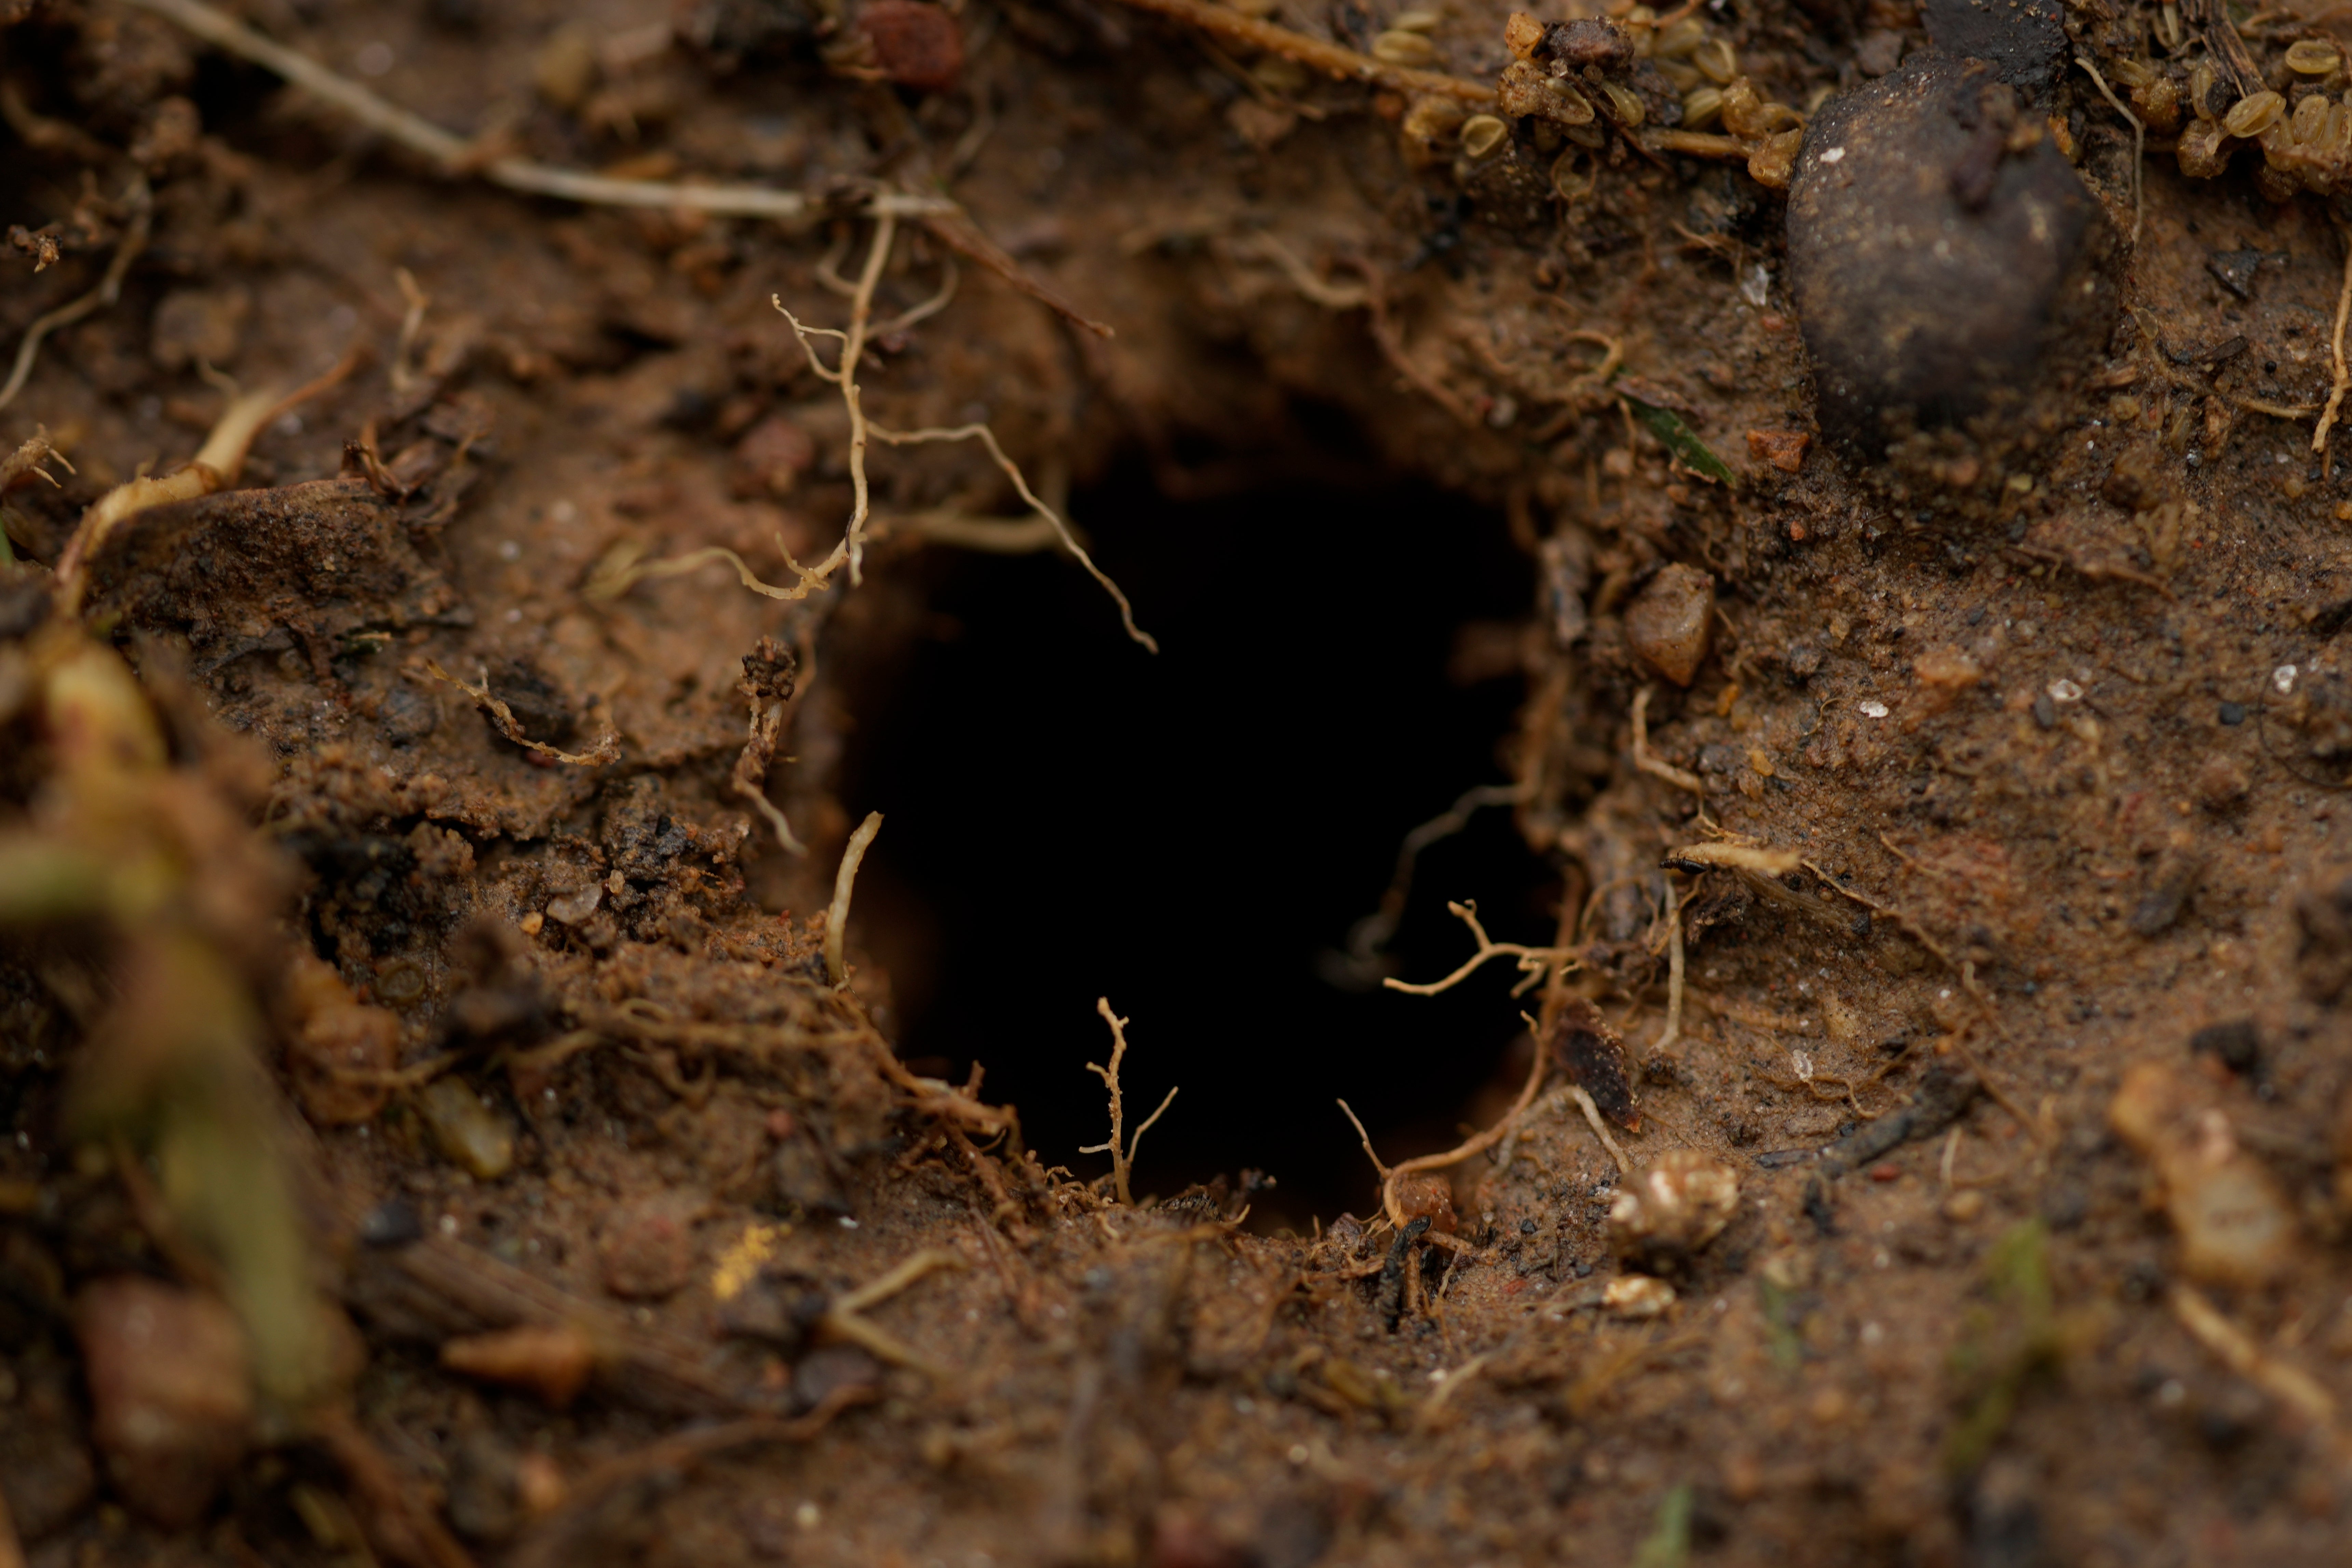 A cicada hole is seen in the soil after a heavy rain on the campus of Wesleyan College in Macon